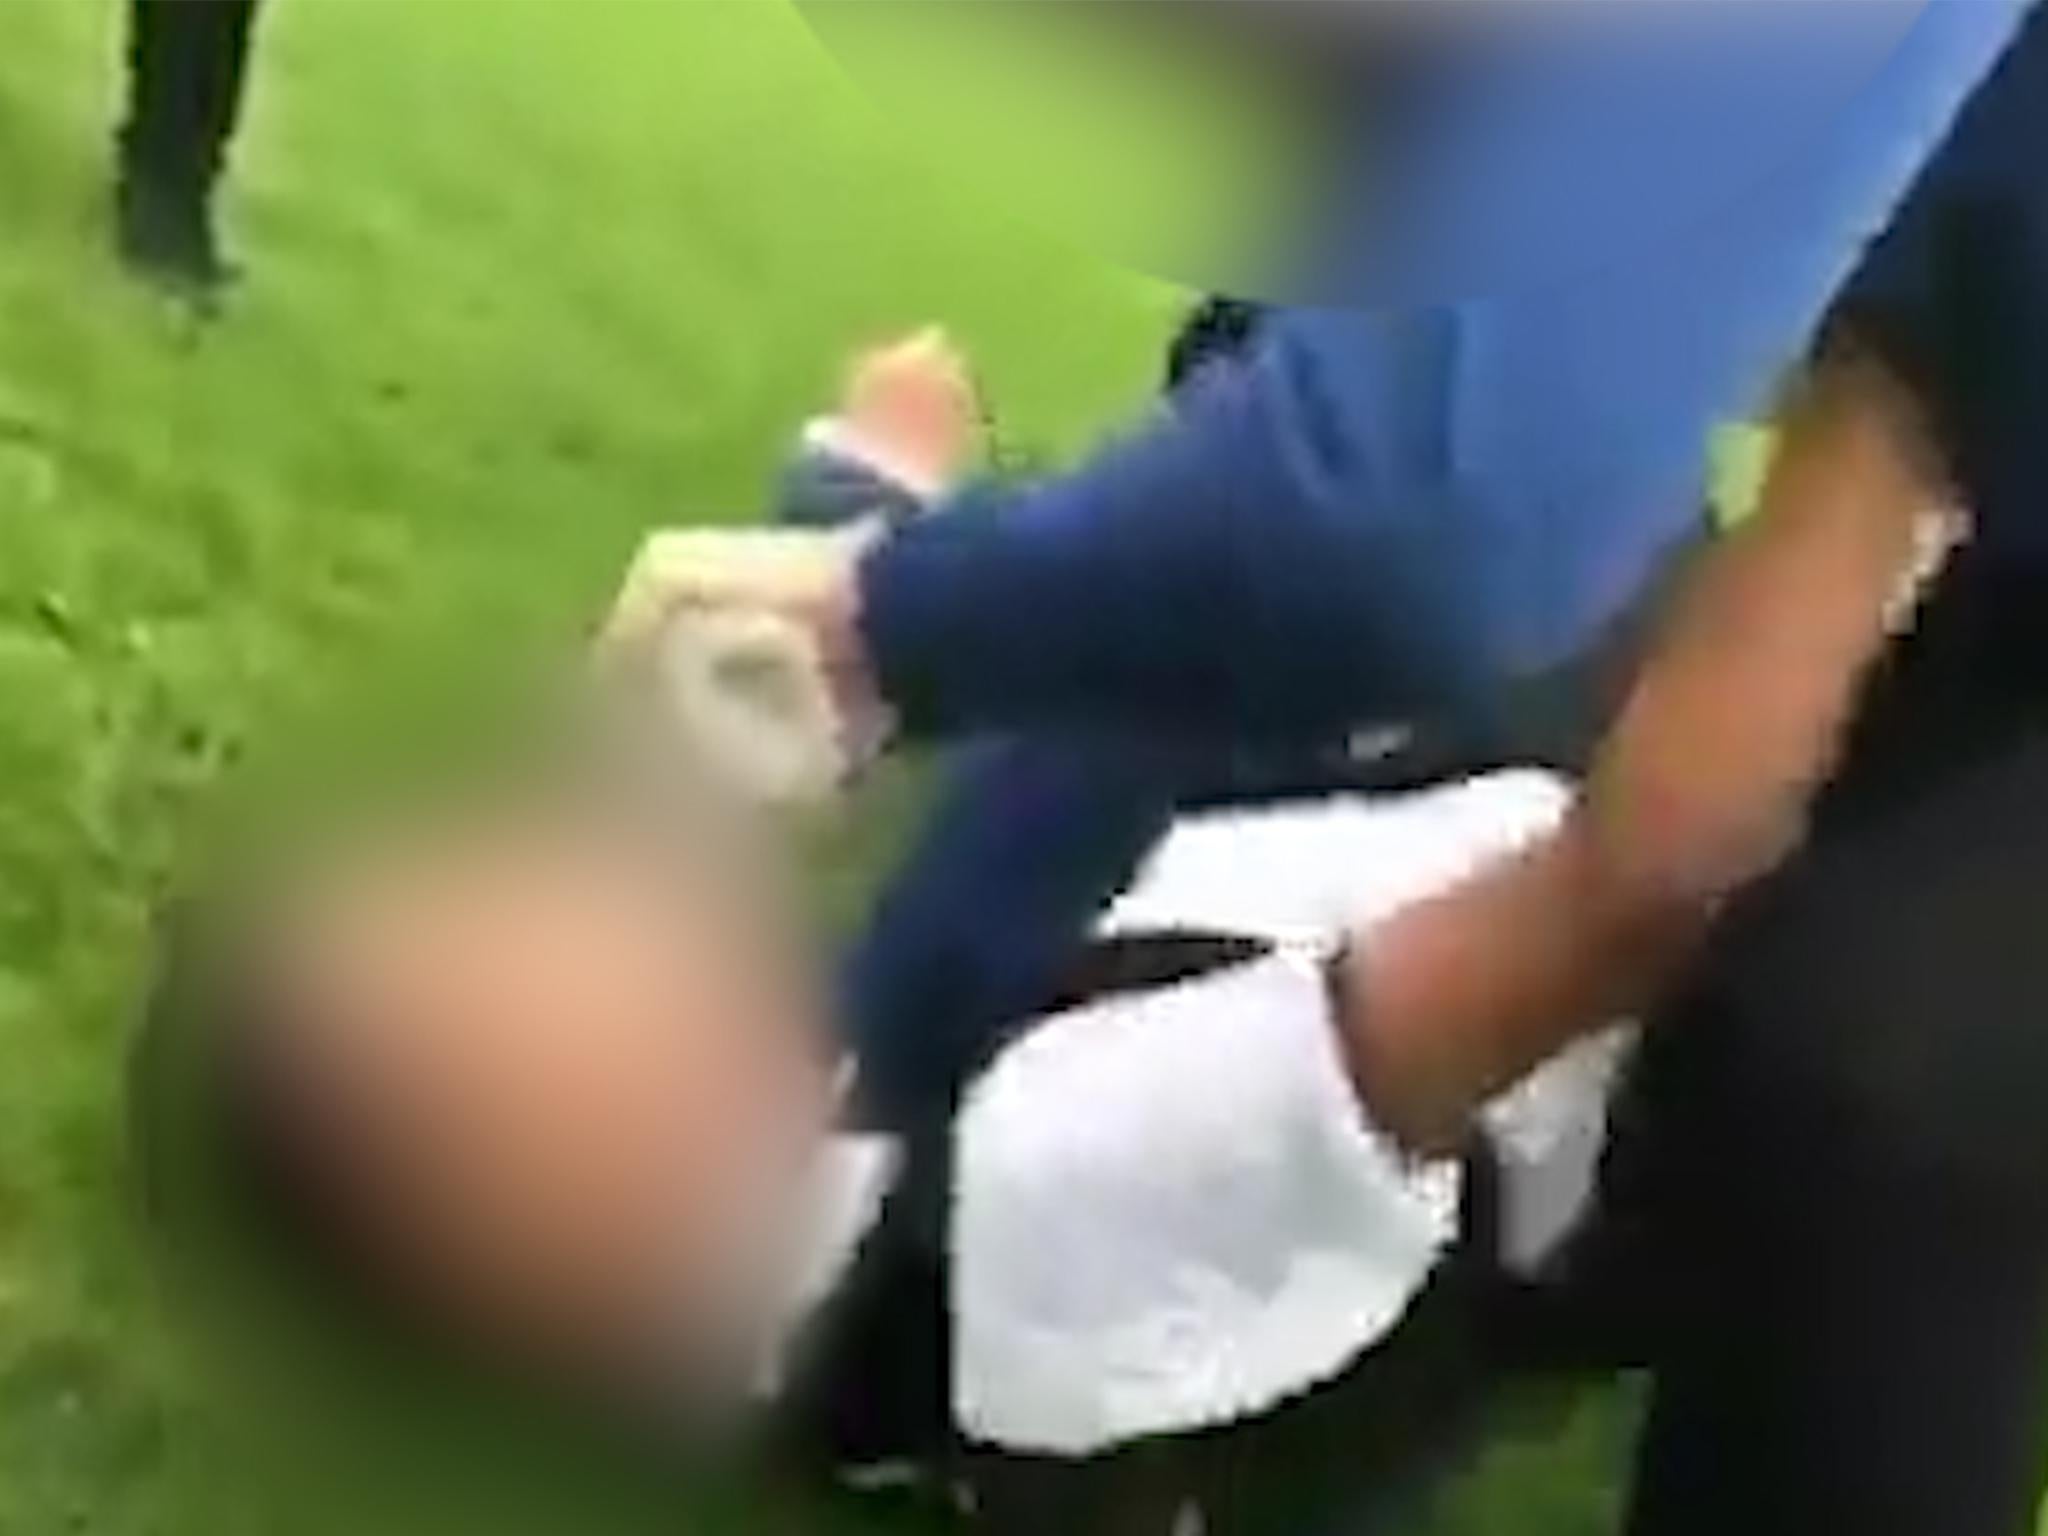 A video shows a 15-year-old boy being grabbed by the neck and thrown to the floor, at a school in Huddersfield last month